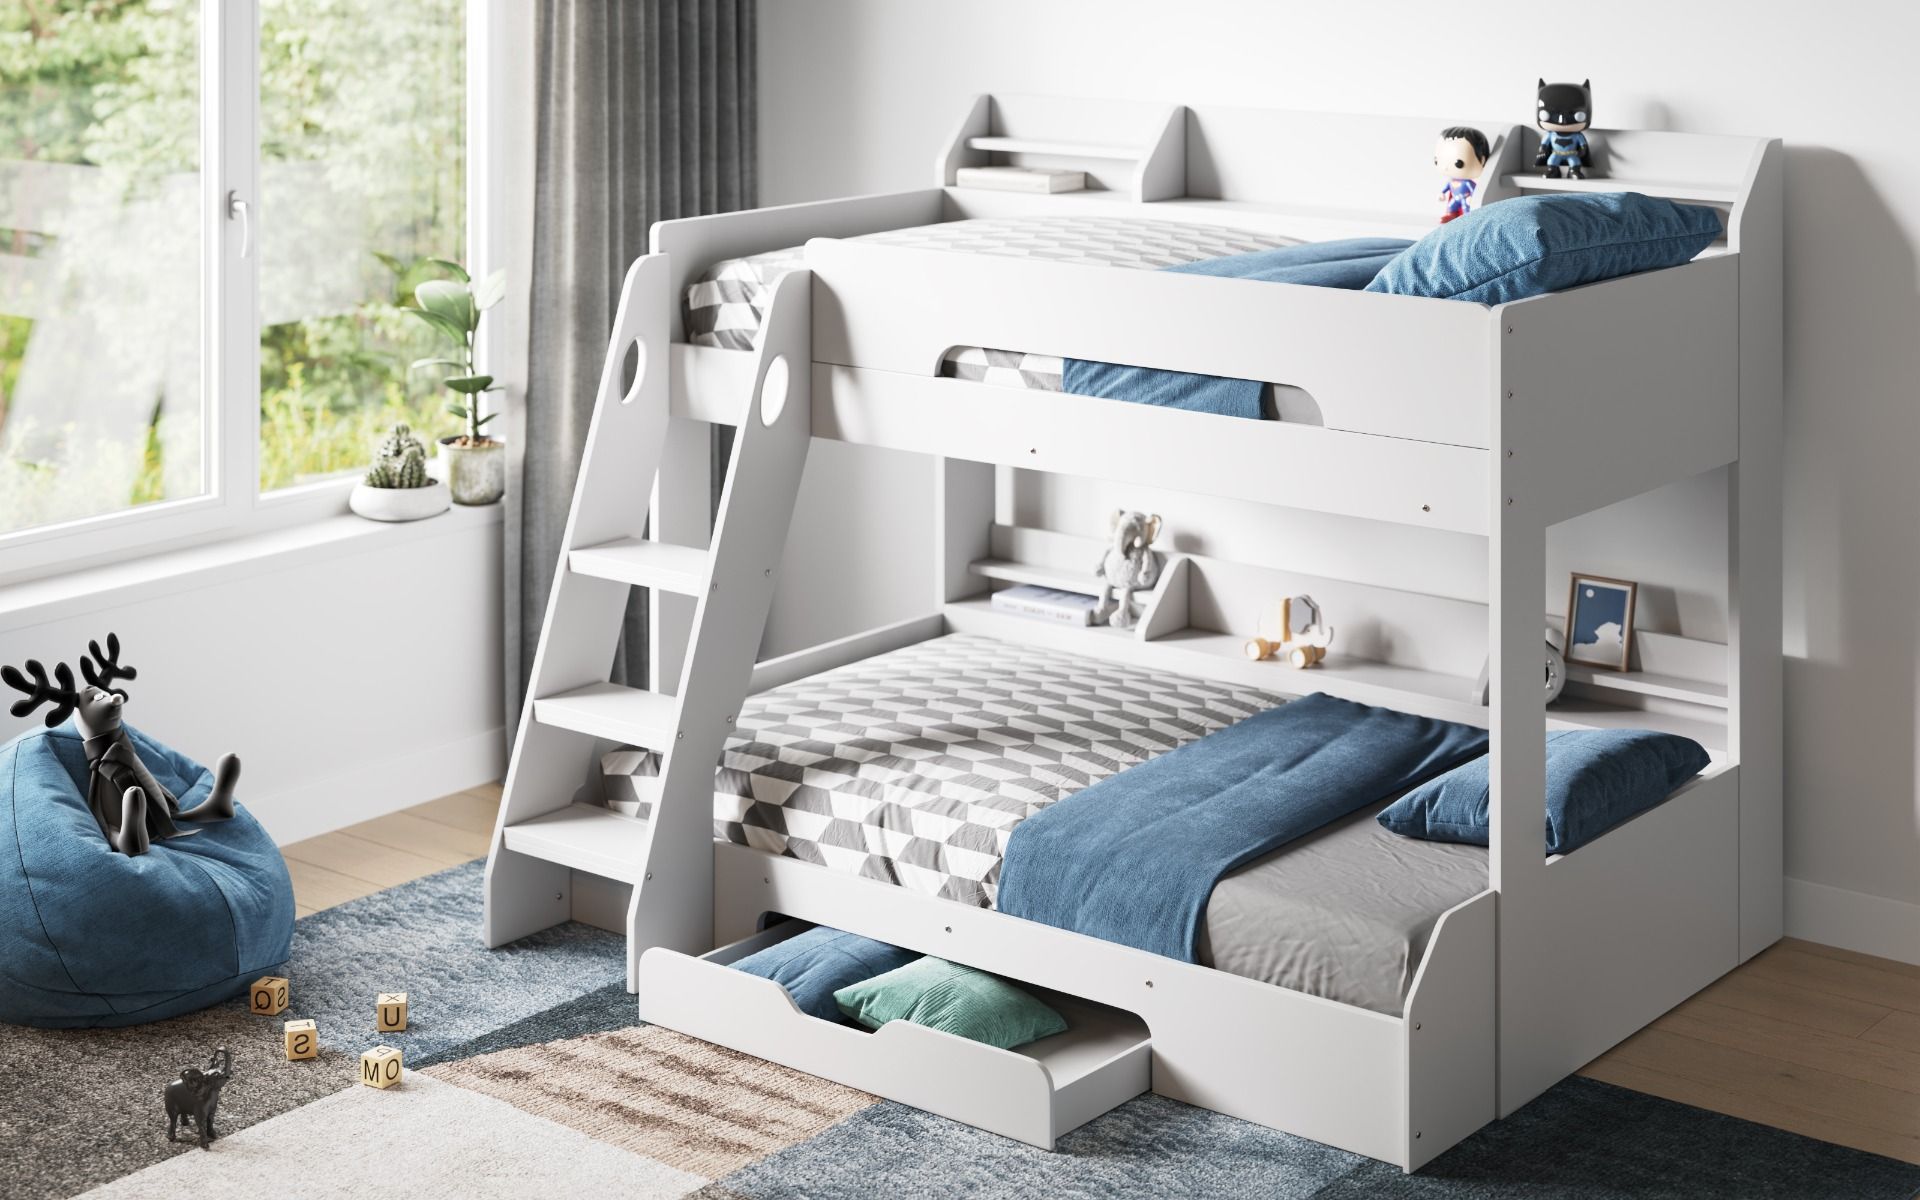 Flair Flick Triple Bunk Bed with Shelves And Drawer - White